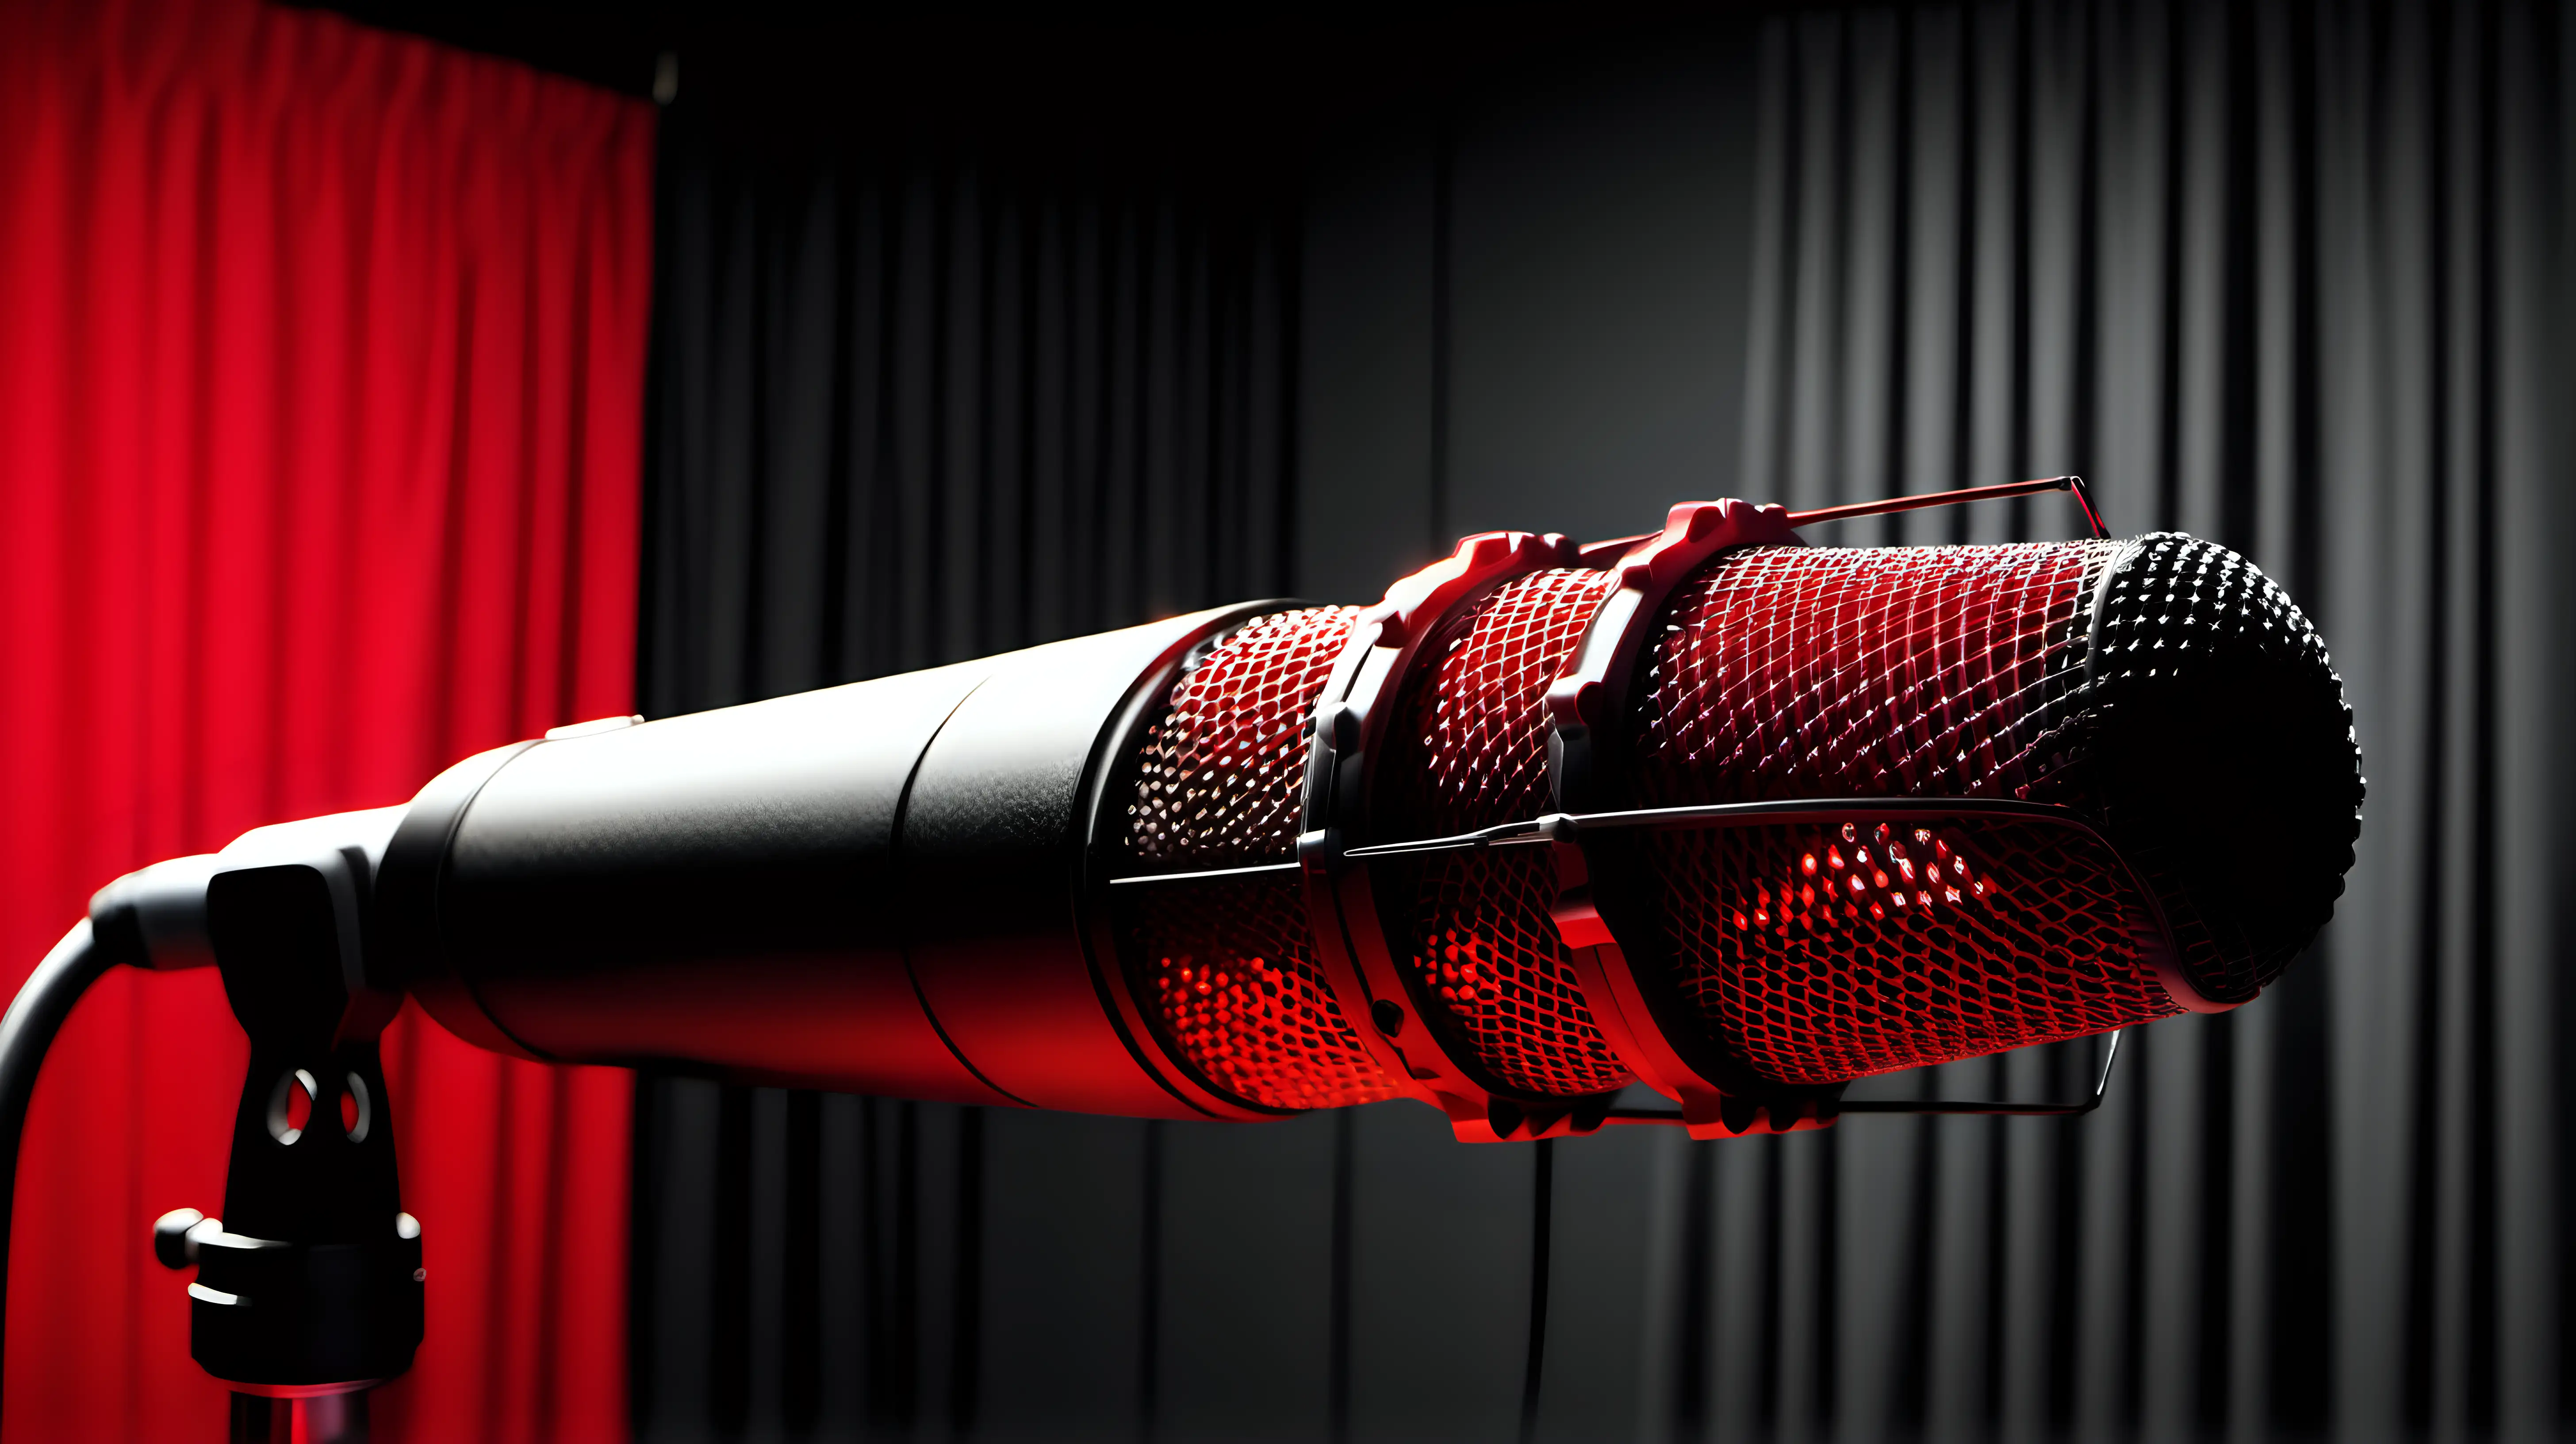 Professional Condenser Microphone in Recording Studio with Red LED Lighting